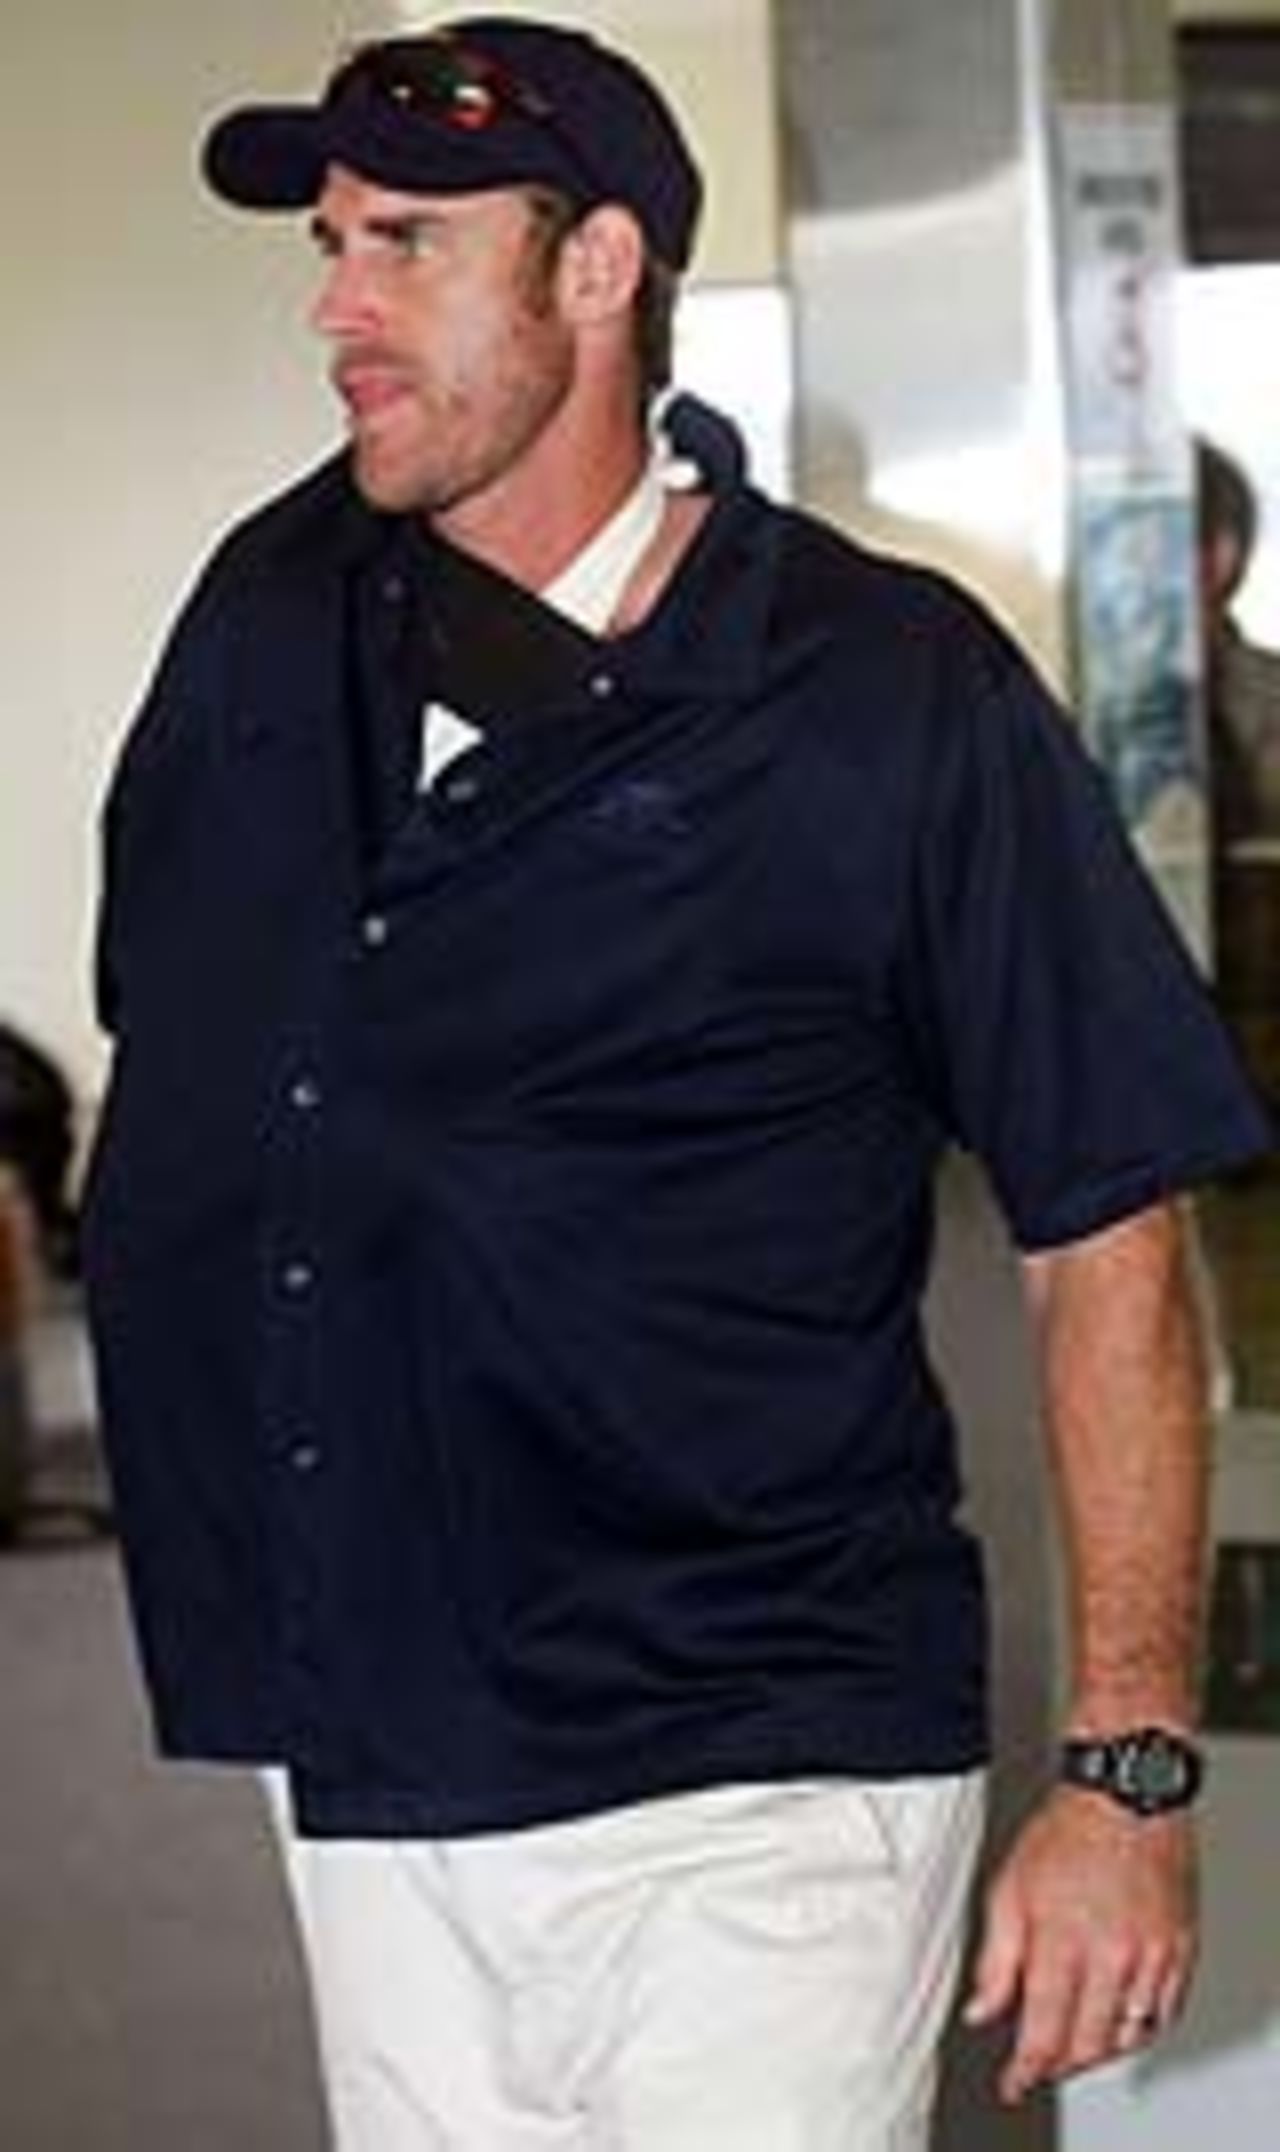 Matthew Hayden with his arm in a sling, Christchurch, February 23, 2005